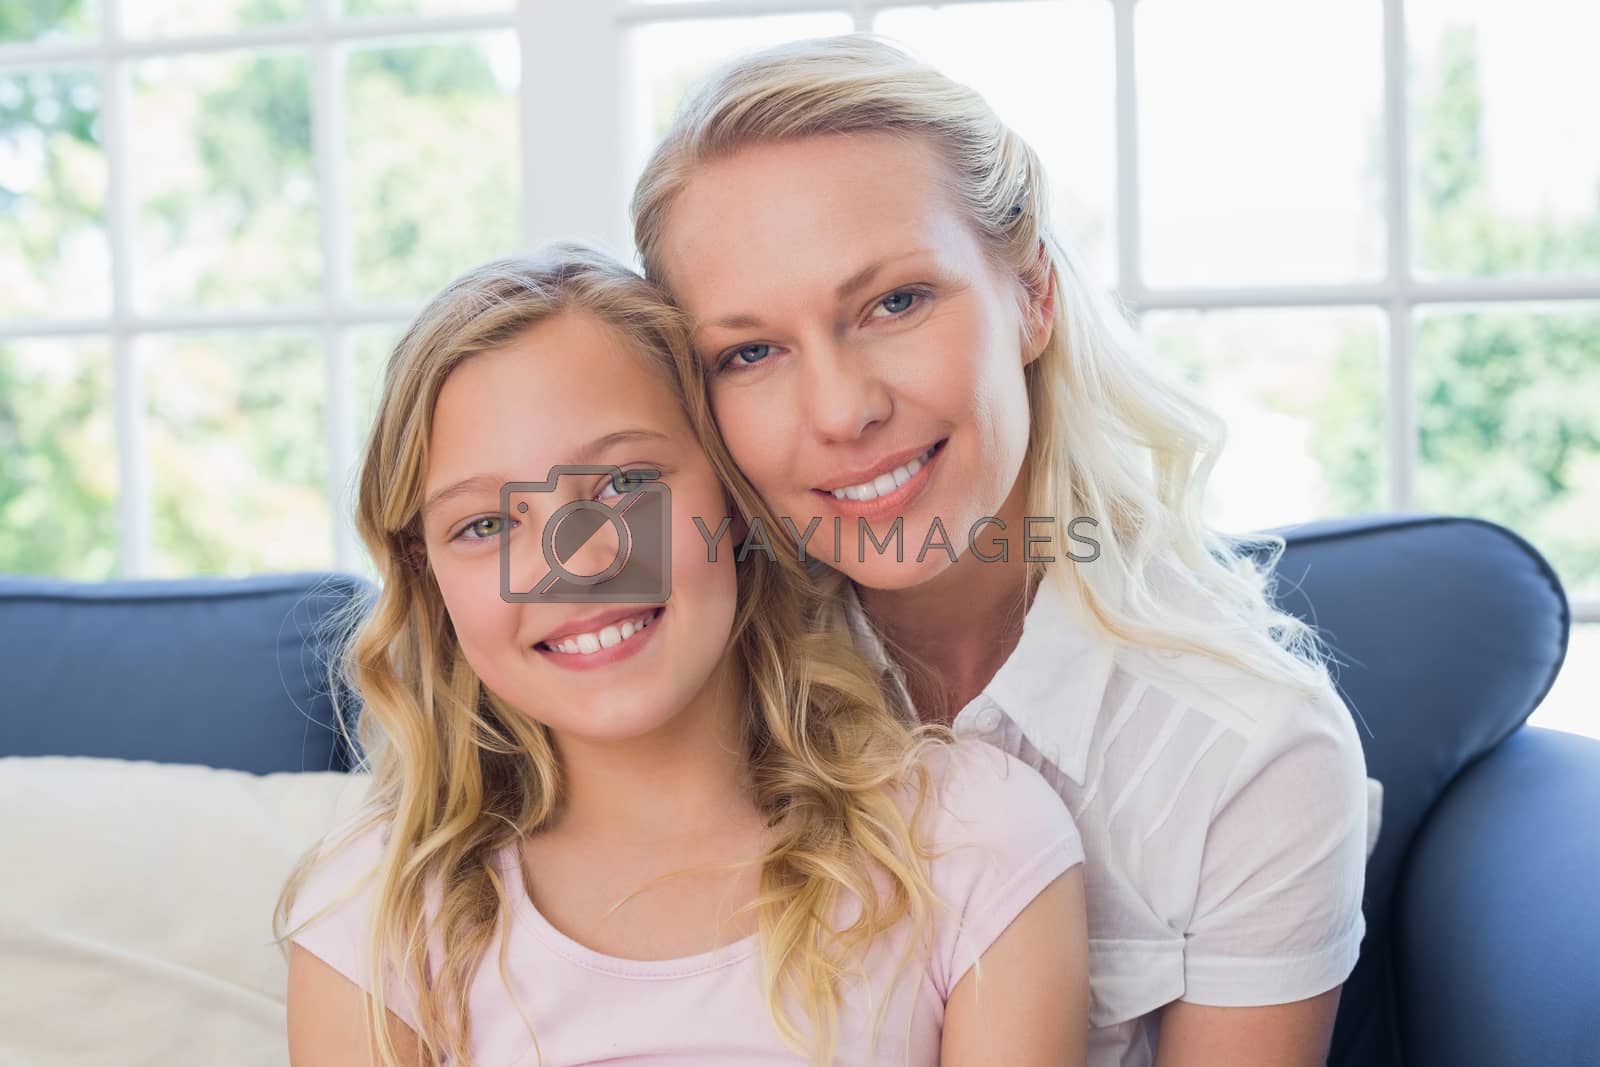 Royalty free image of Happy mother and daughter sitting on sofa by Wavebreakmedia